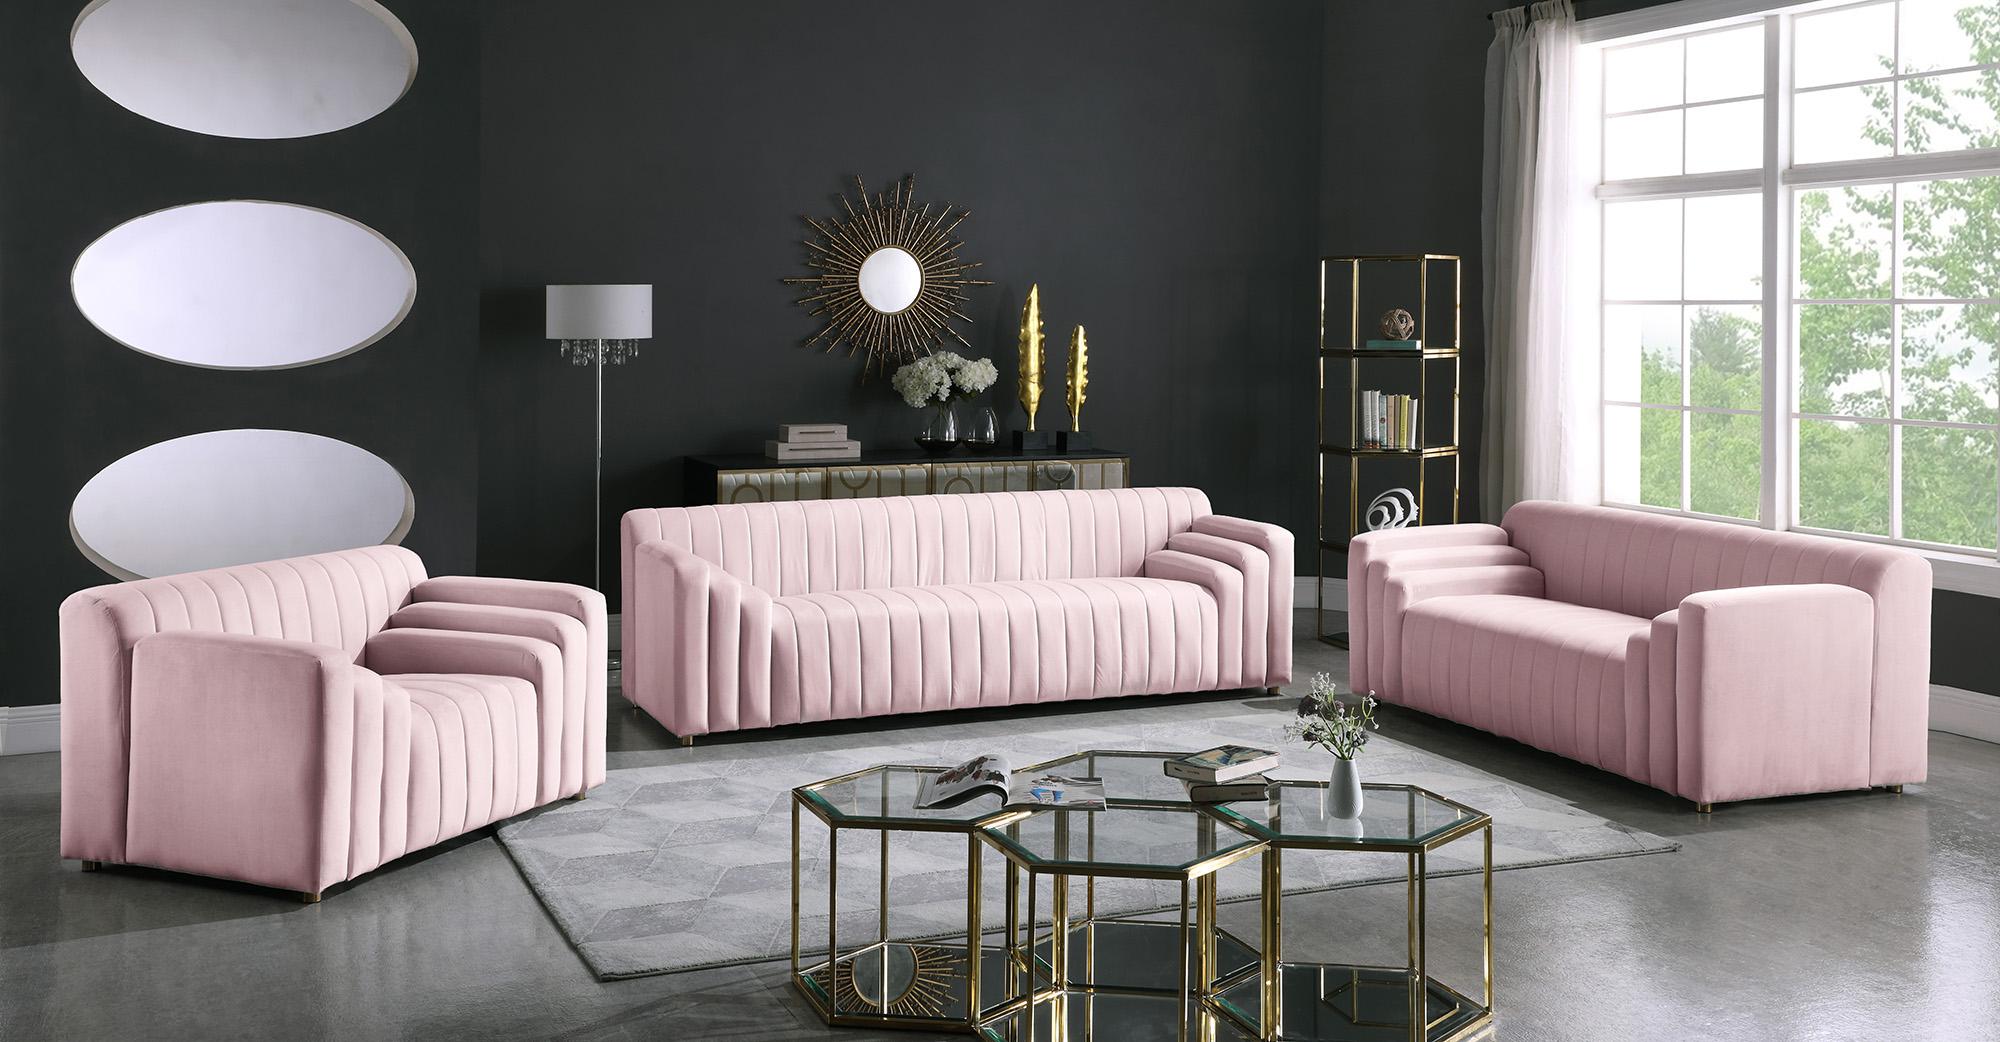 

    
637Pink-C Pink Velvet Channel Tufted Chair NAYA 637Pink-C Meridian Contemporary Modern
